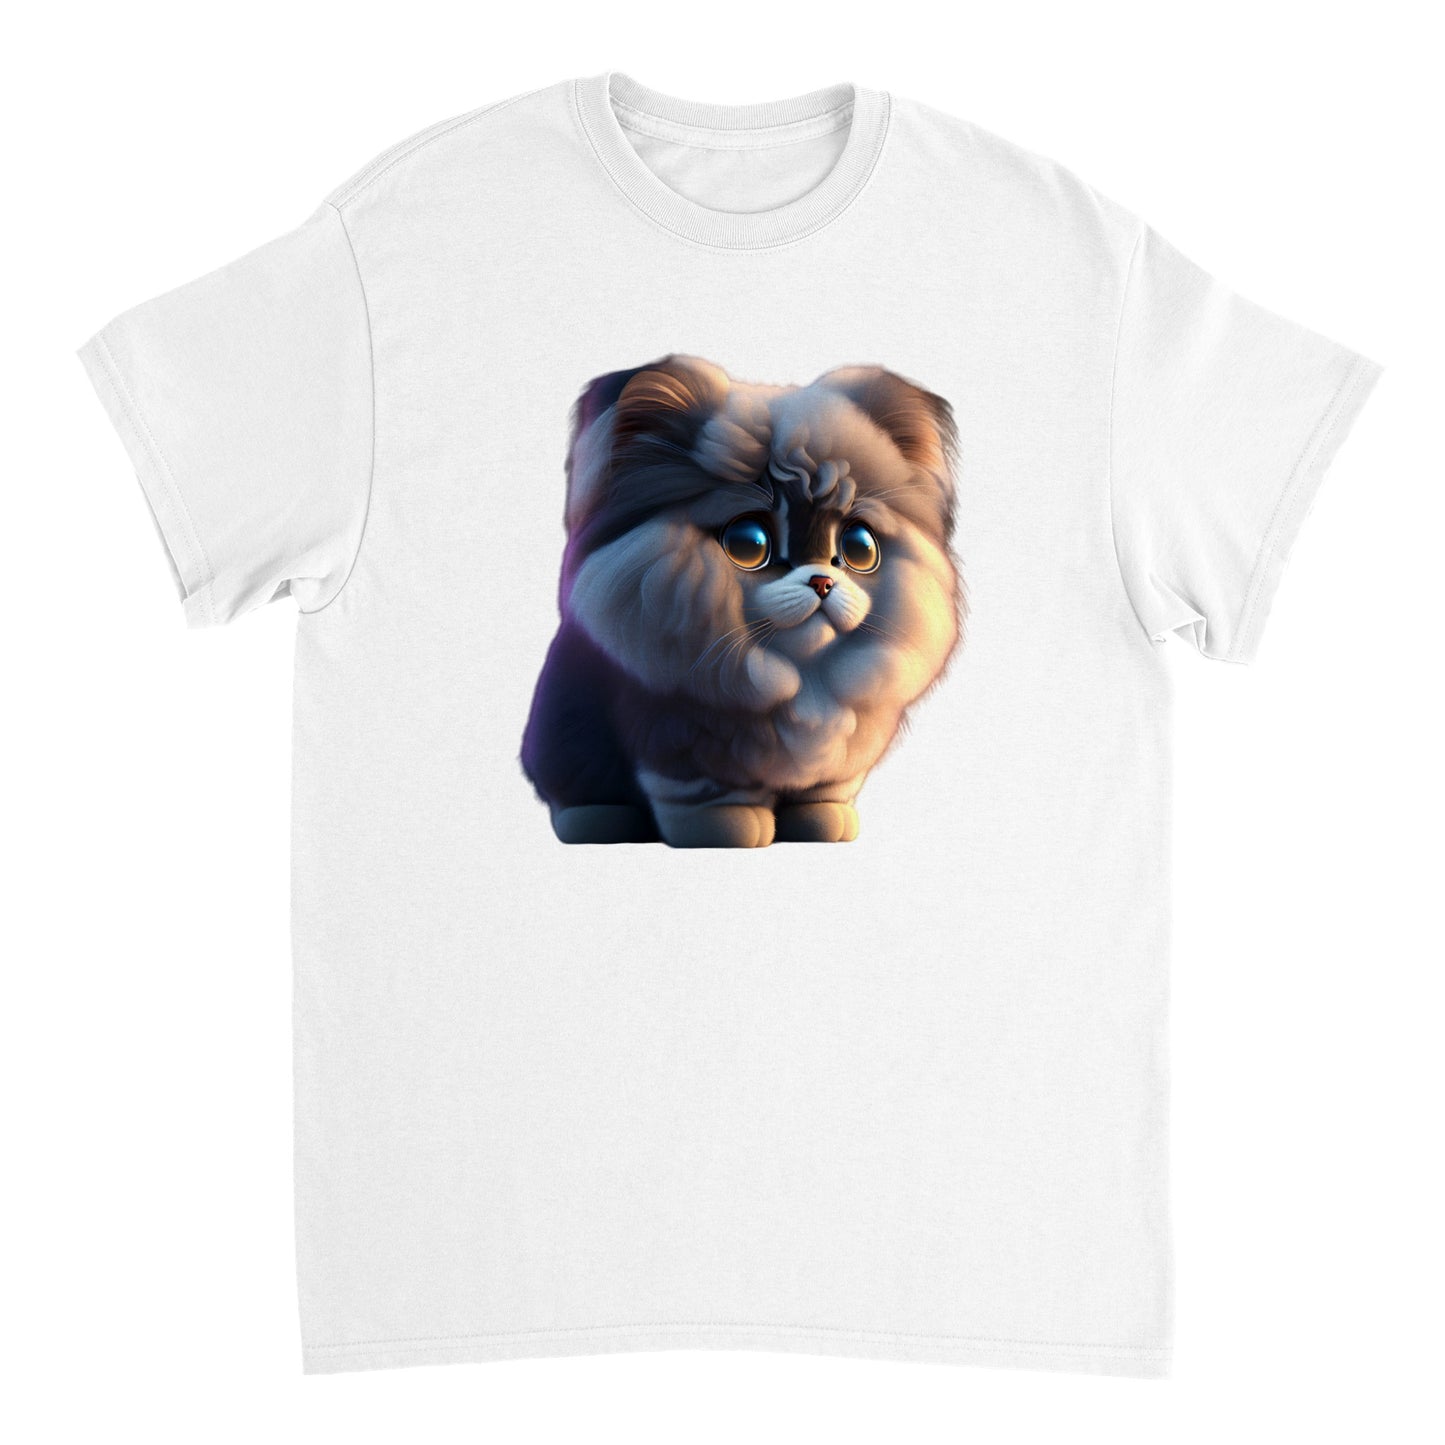 Adorable, Cool, Cute Cats and Kittens Toy - Heavyweight Unisex Crewneck T-shirt 8